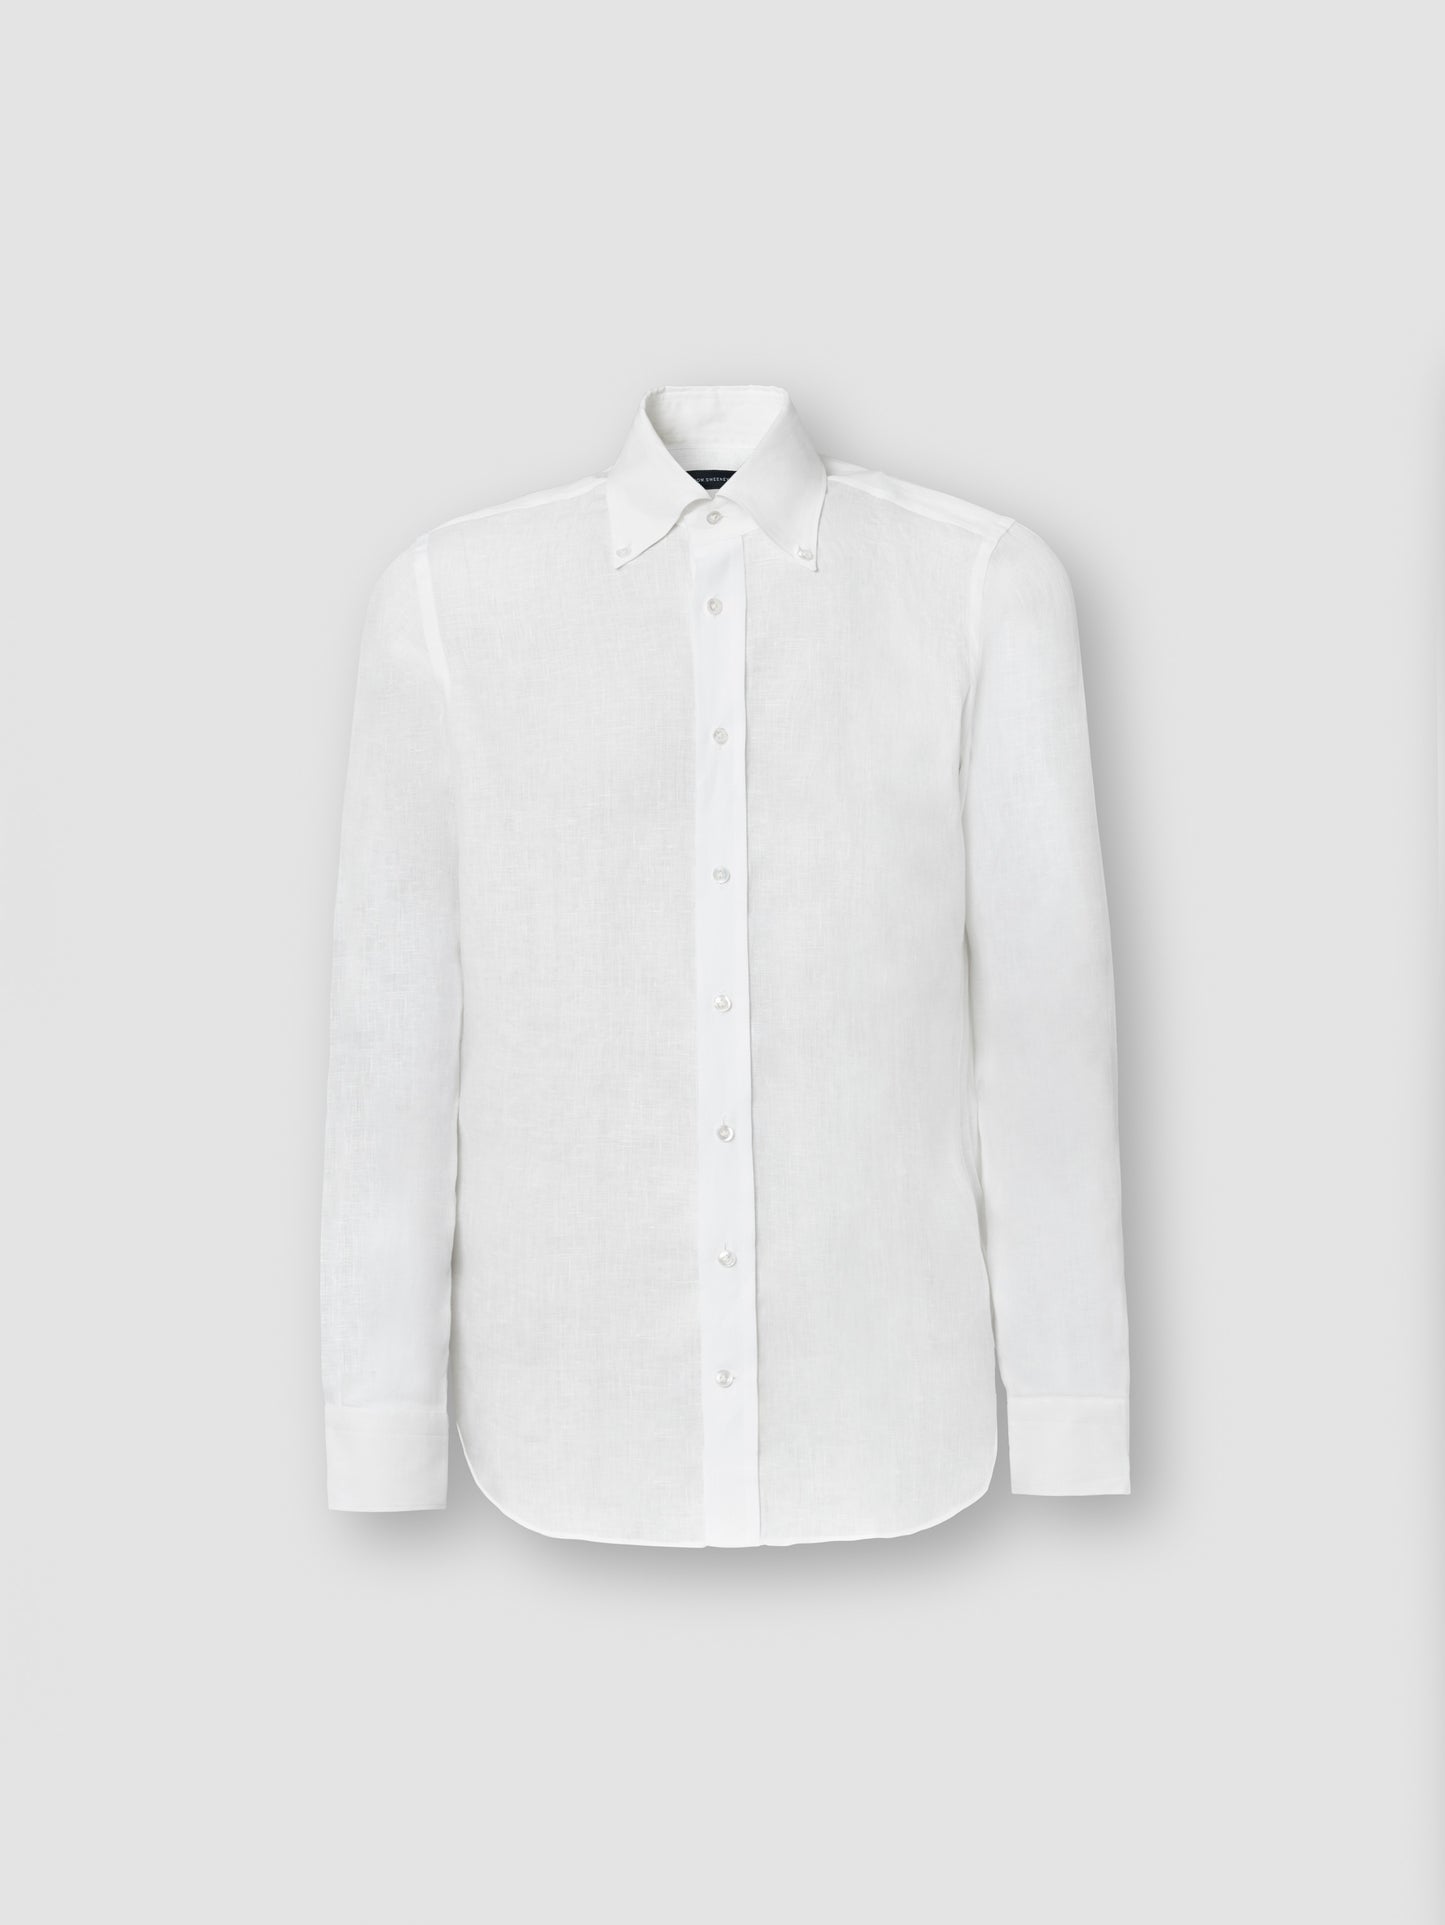 Button Down Collar Linen Shirt White Product Image